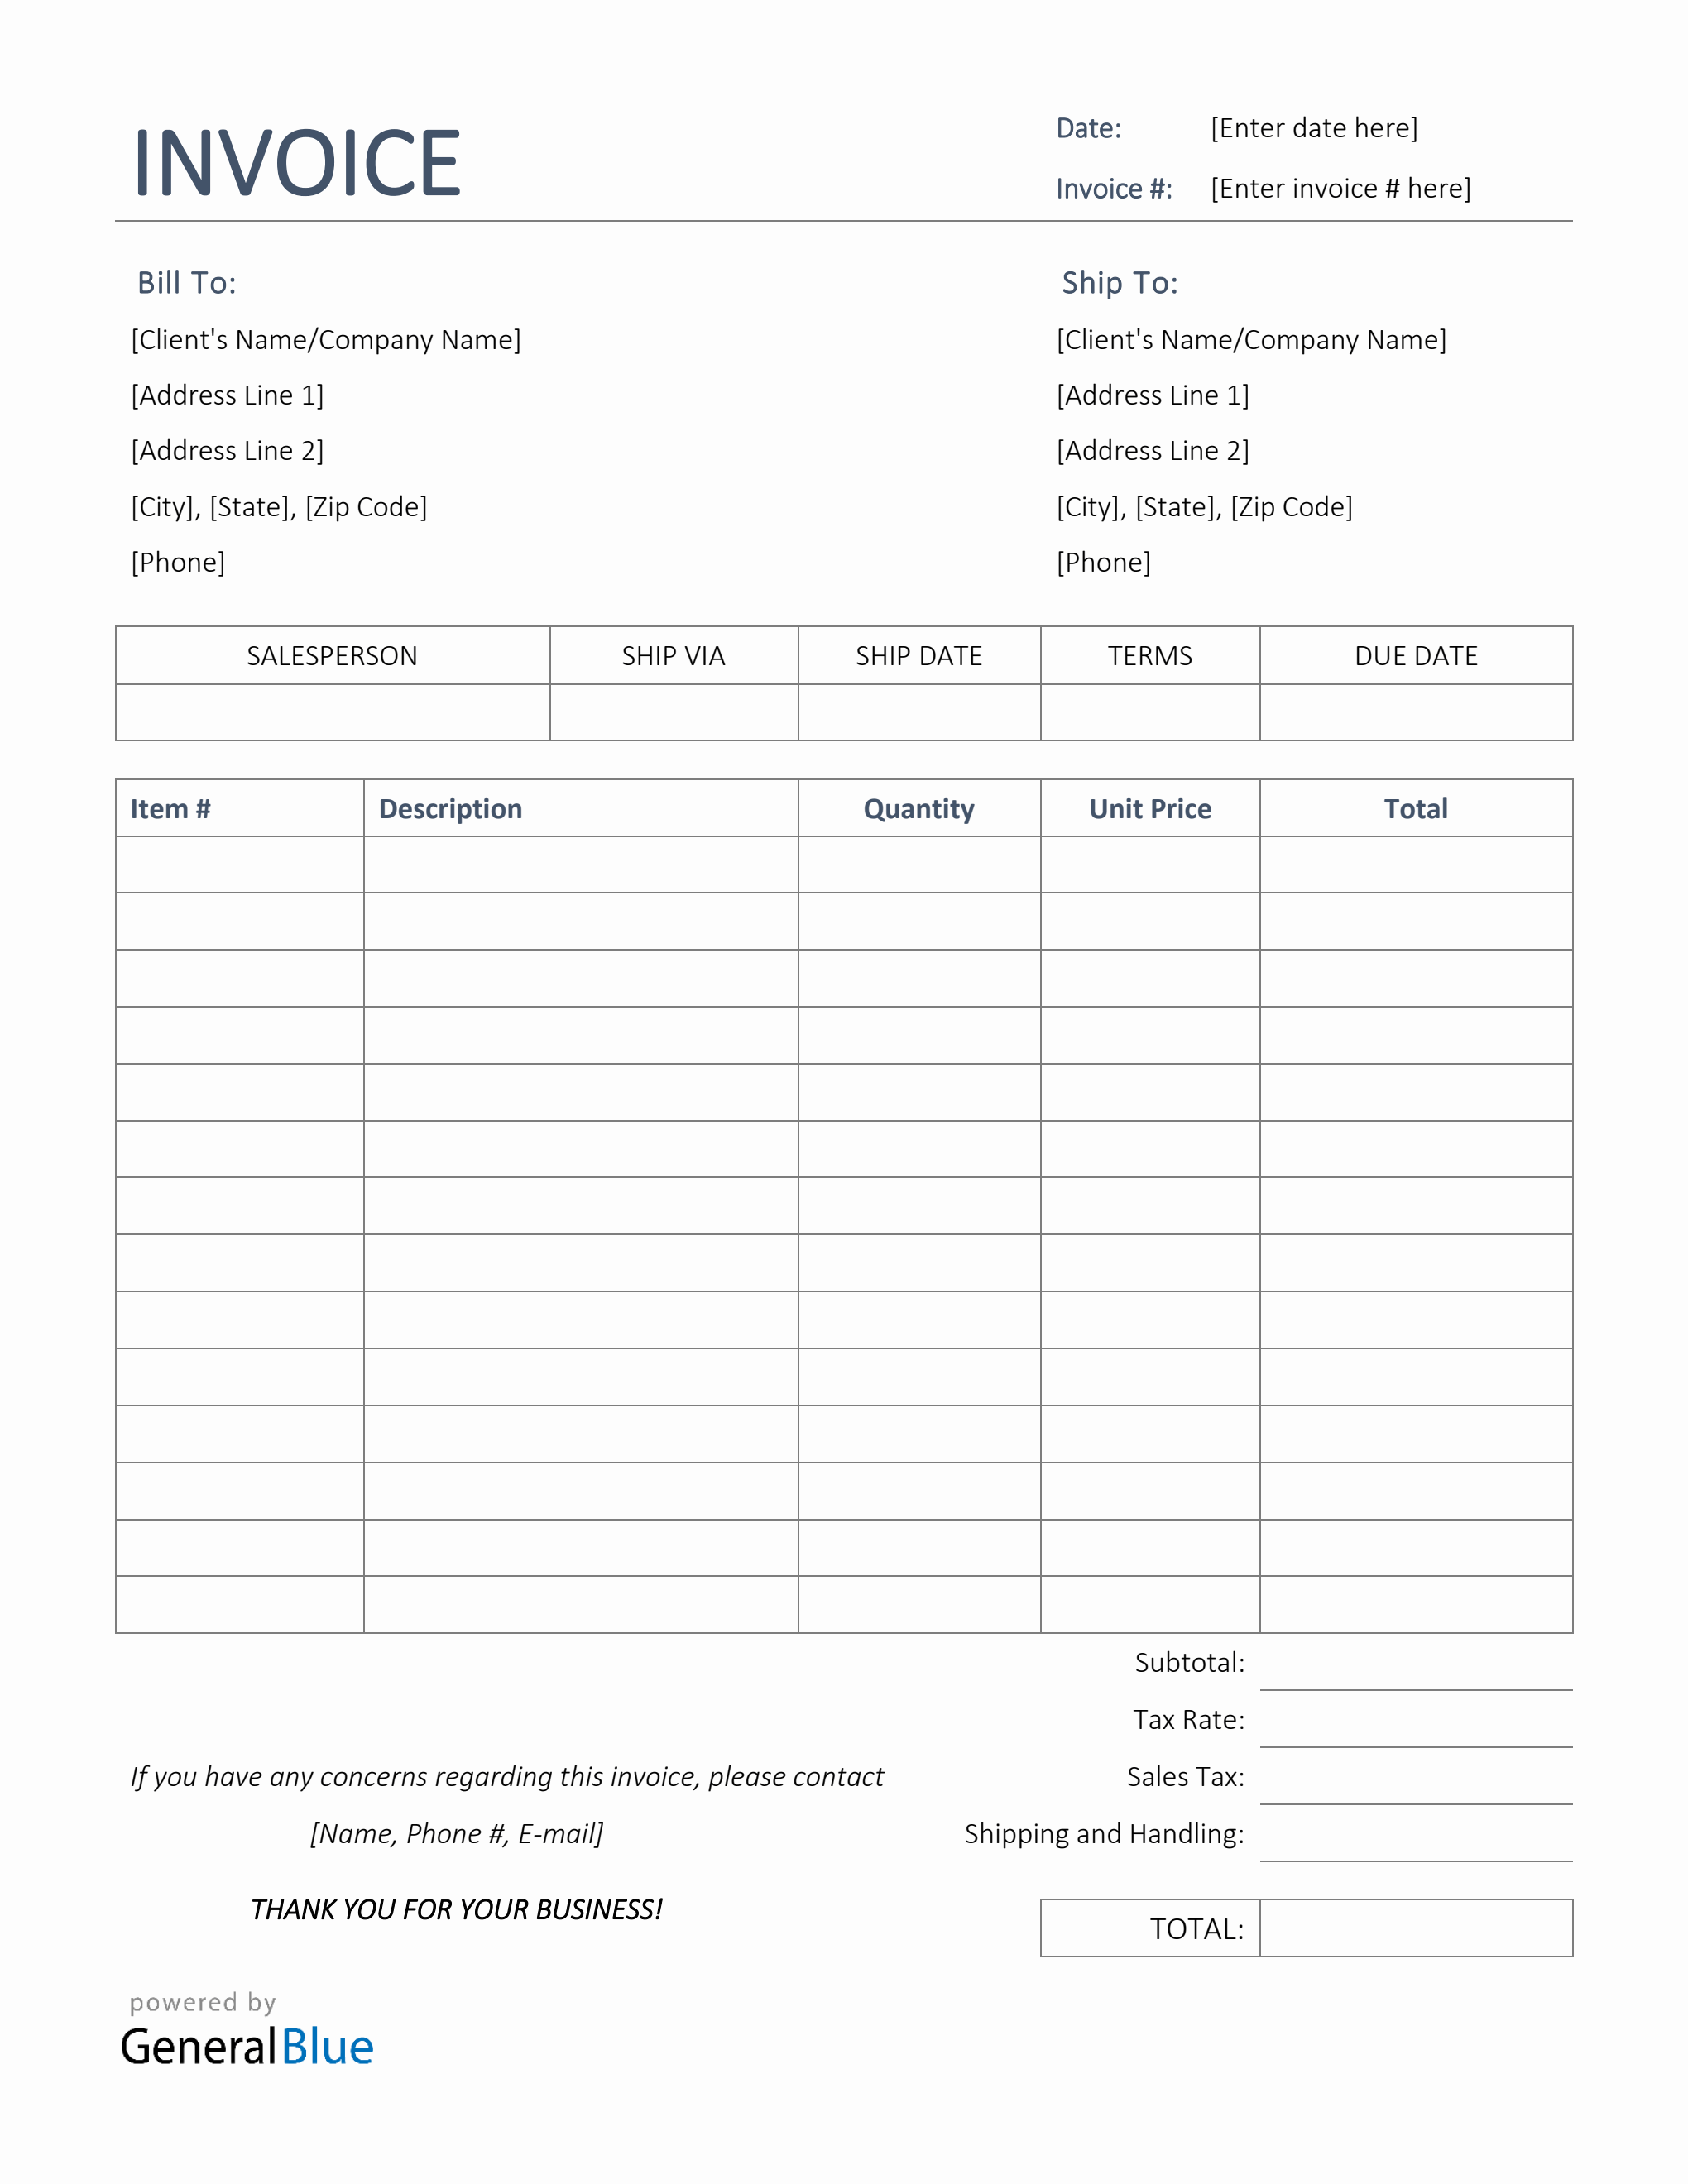 Sales Invoice Template in Word (Simple) Intended For Car Sales Invoice Template Free Download